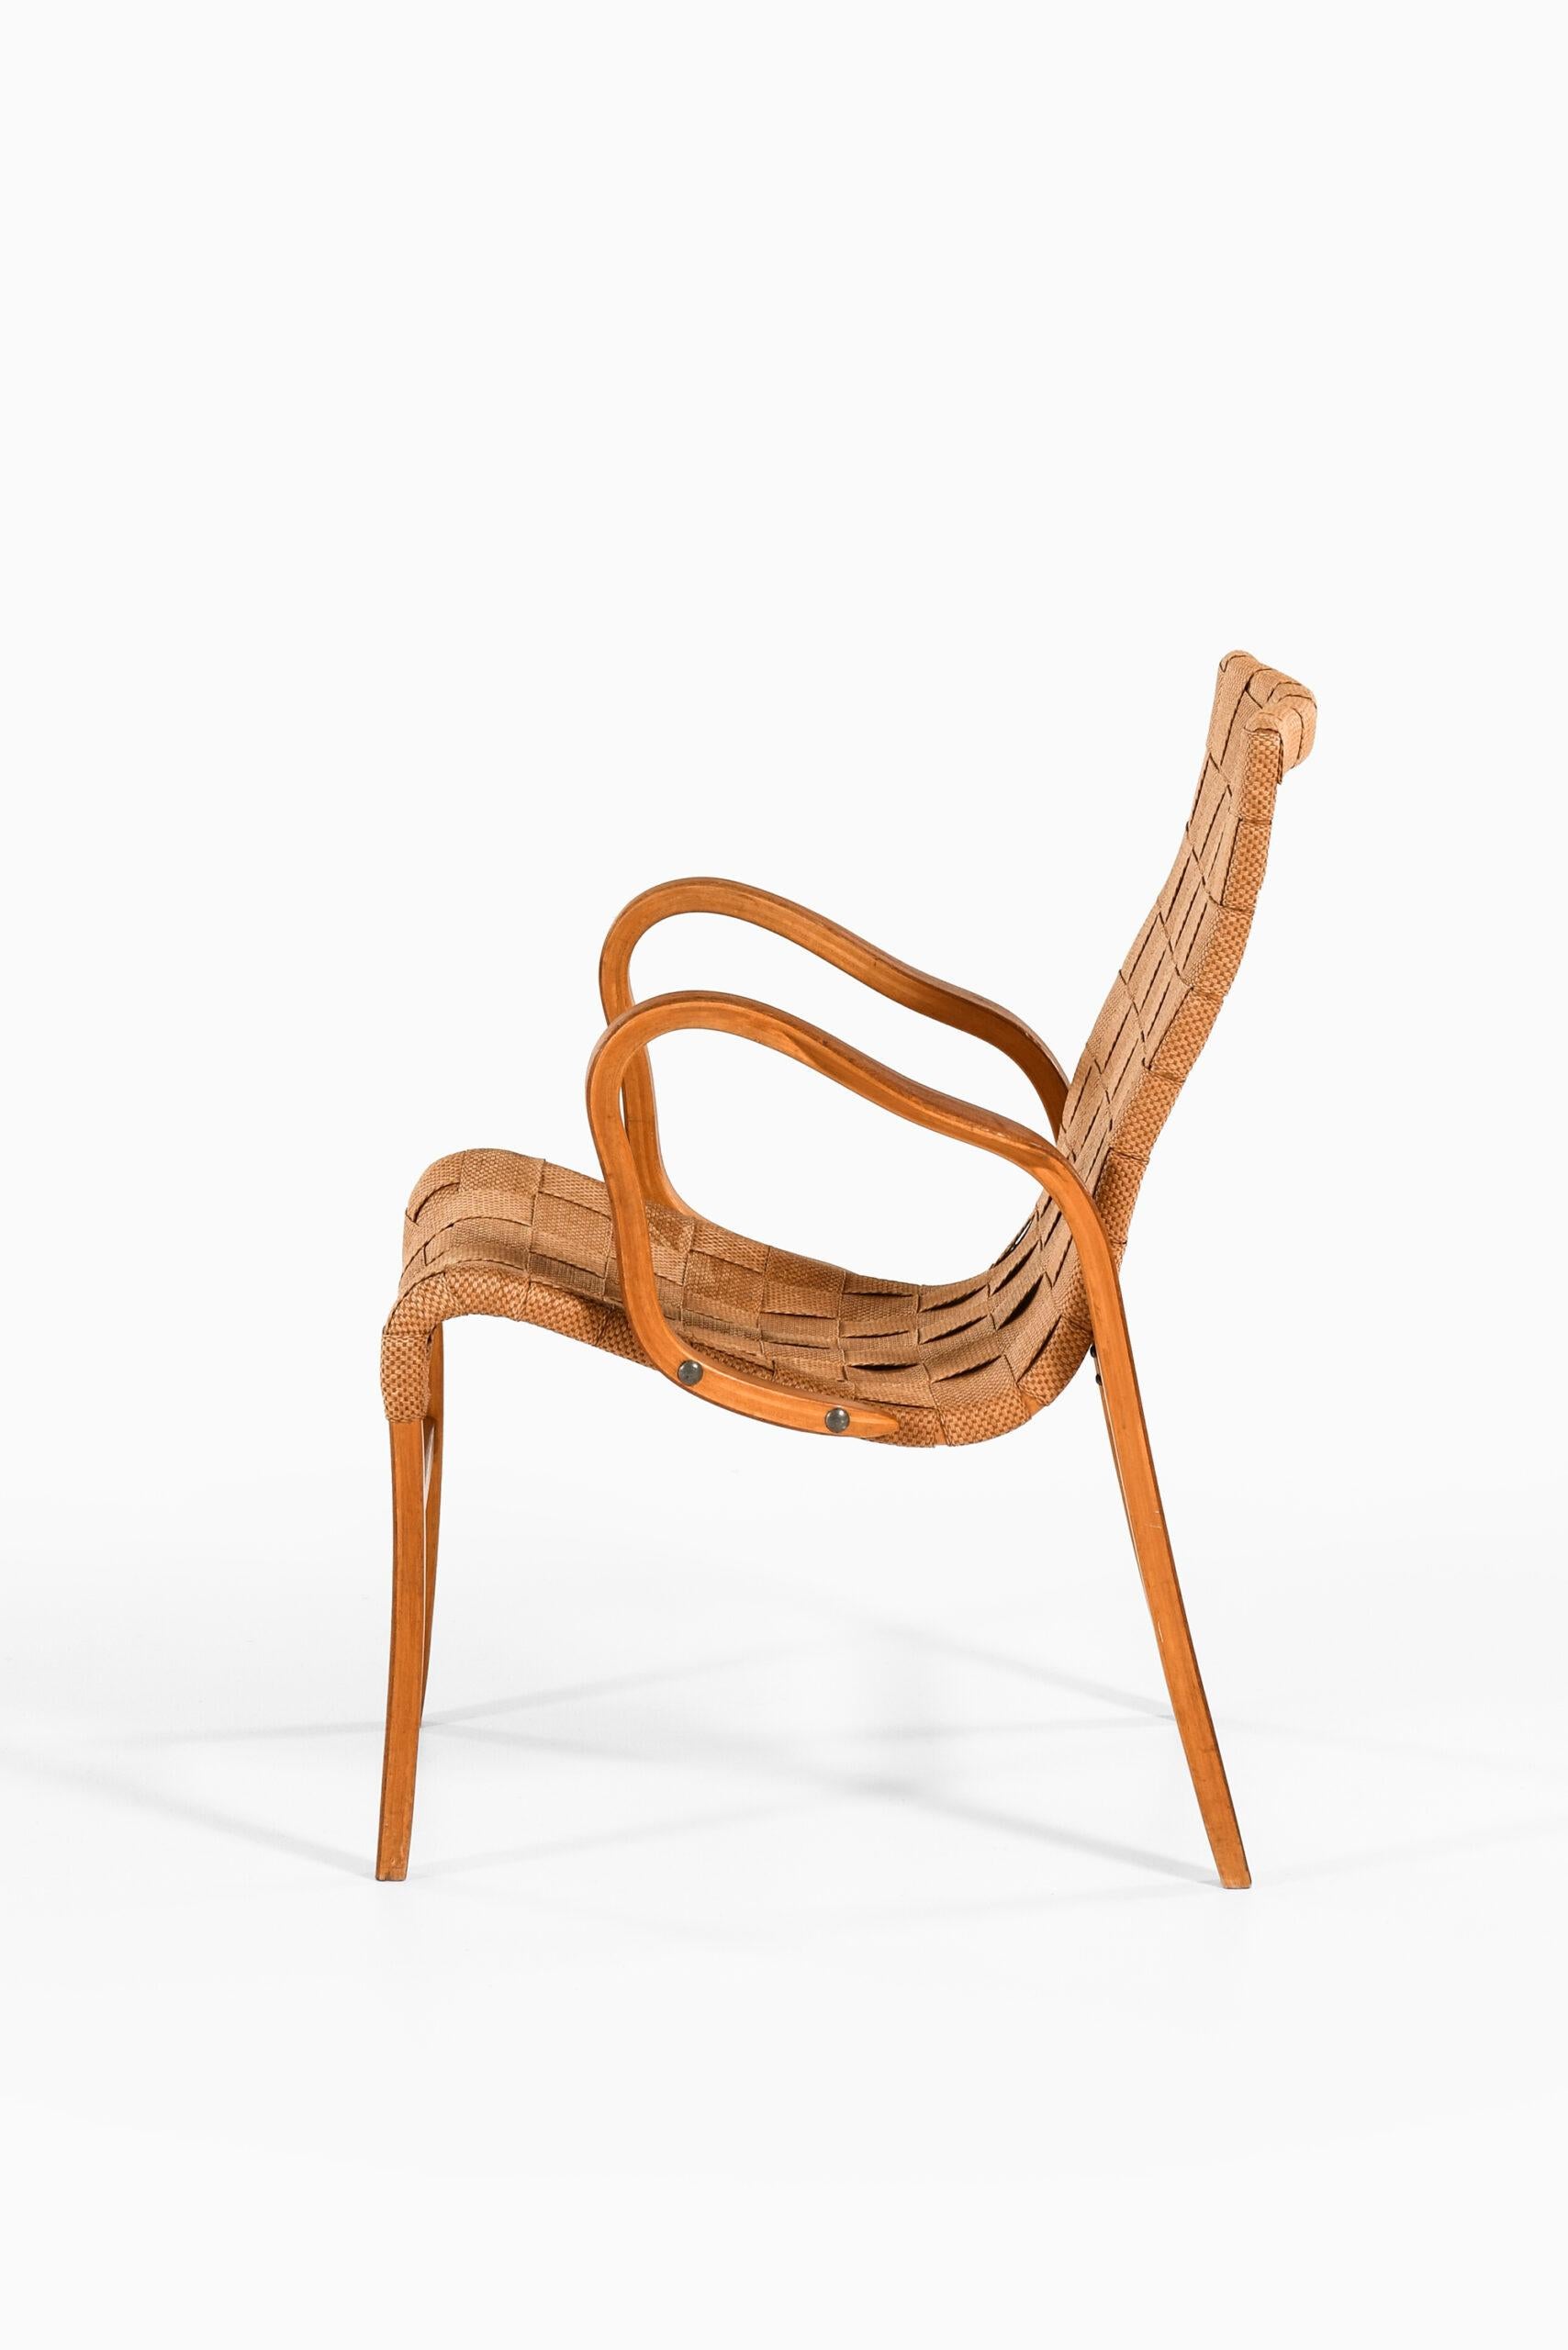 Swedish Easy Chair Attributed to Elias Svedberg Produced by Ferdinand Lundquist For Sale